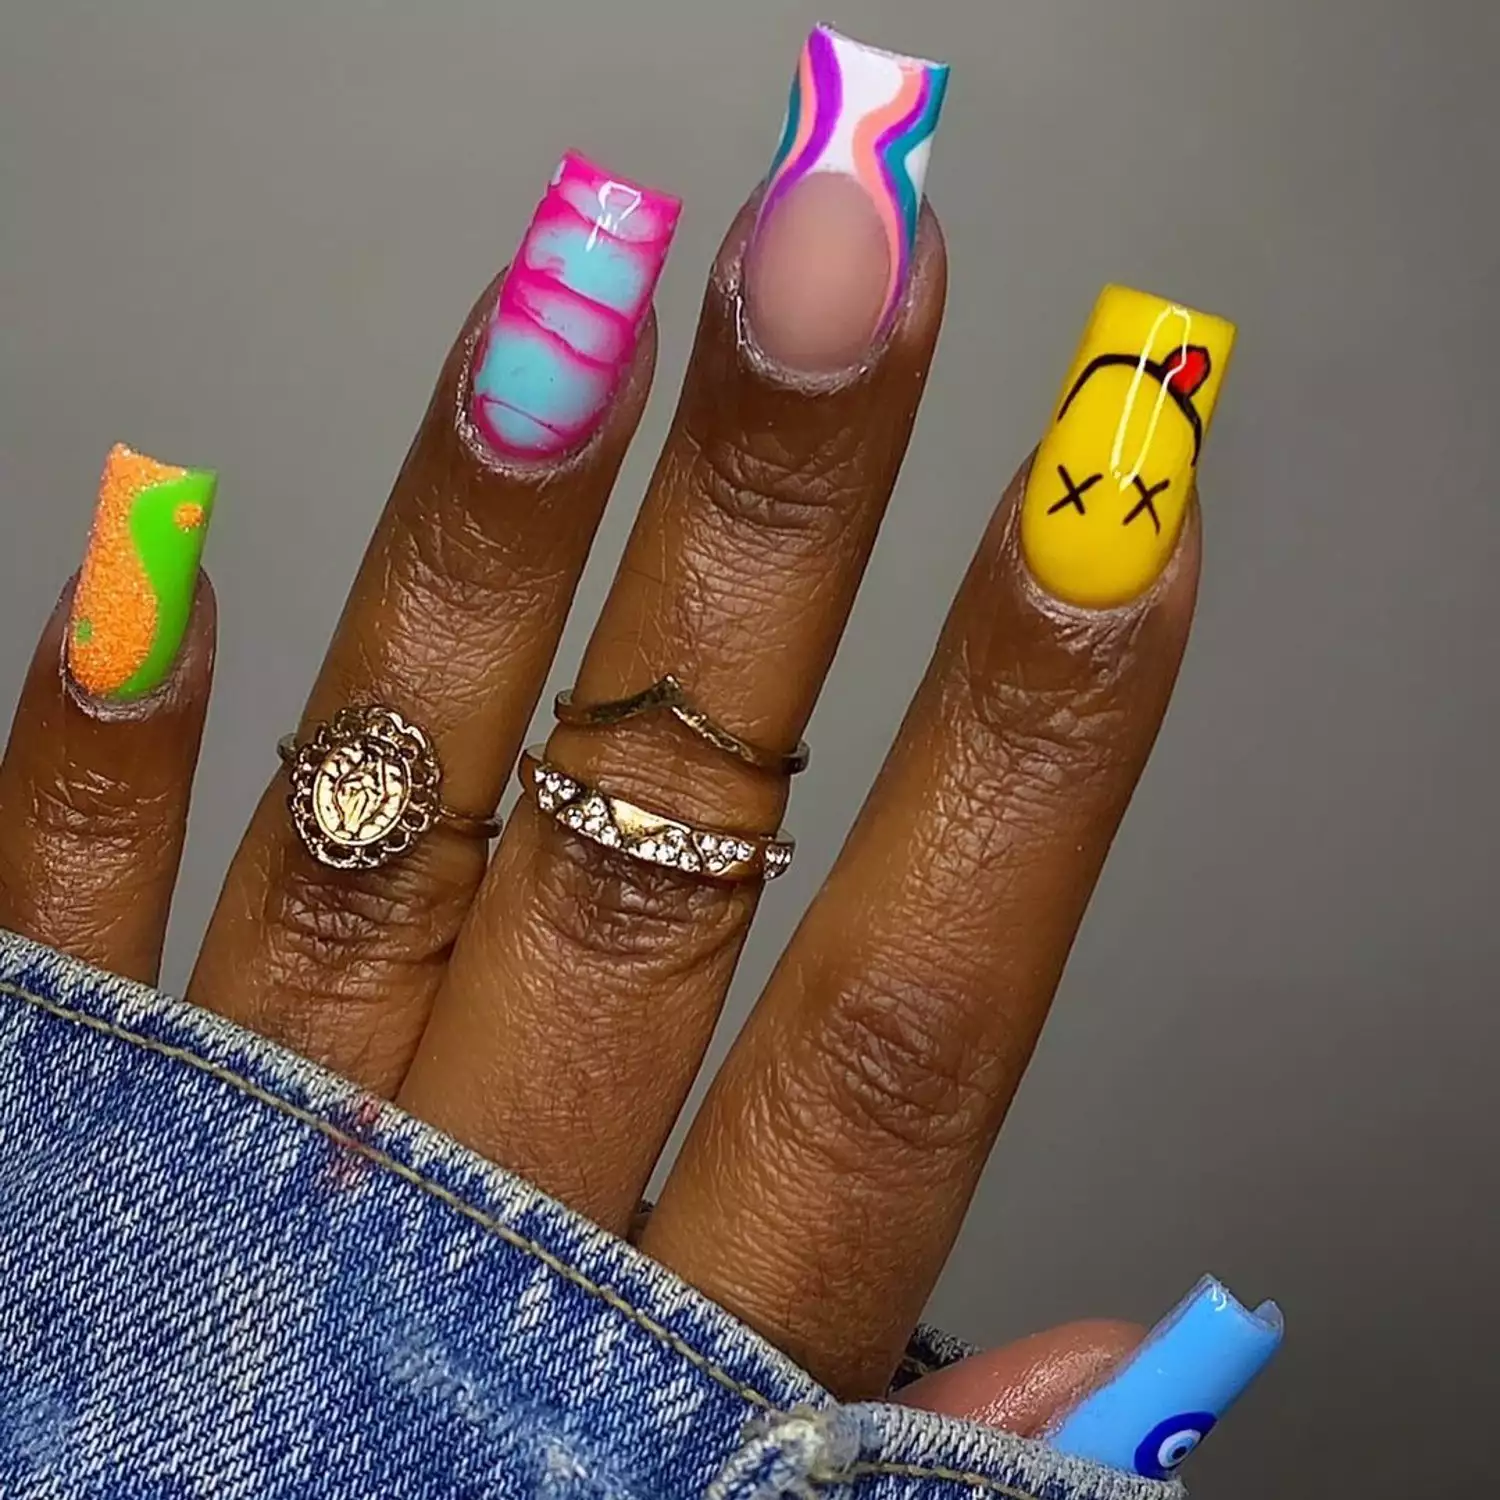 Mismatched manicure with brightly colored smiley face, wave, dye, evil eye, and yin/yang designs